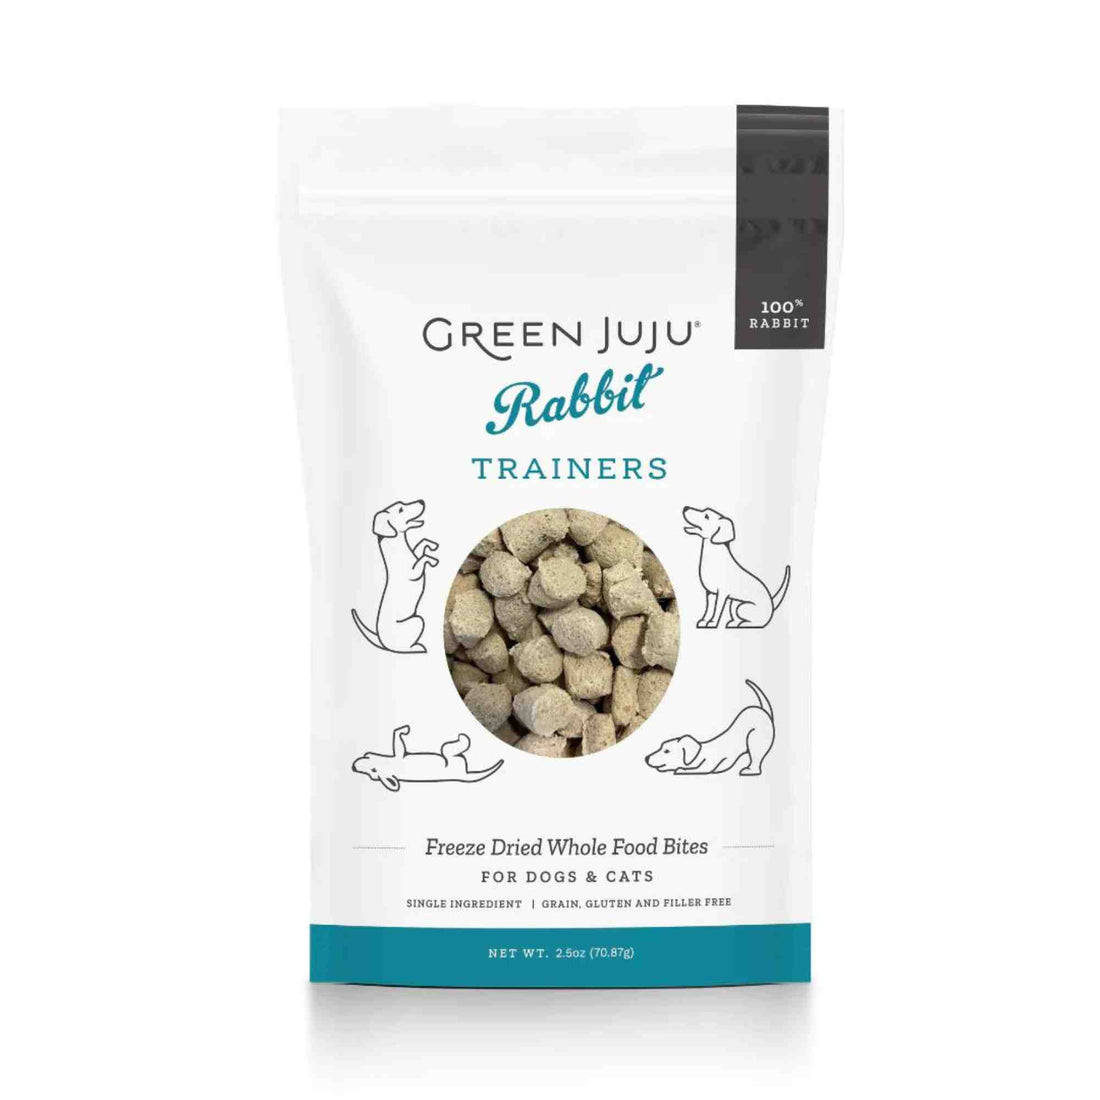 Rabbit trainers freeze dried whole food bites for dogs and cats single ingredient front of bag - green juju